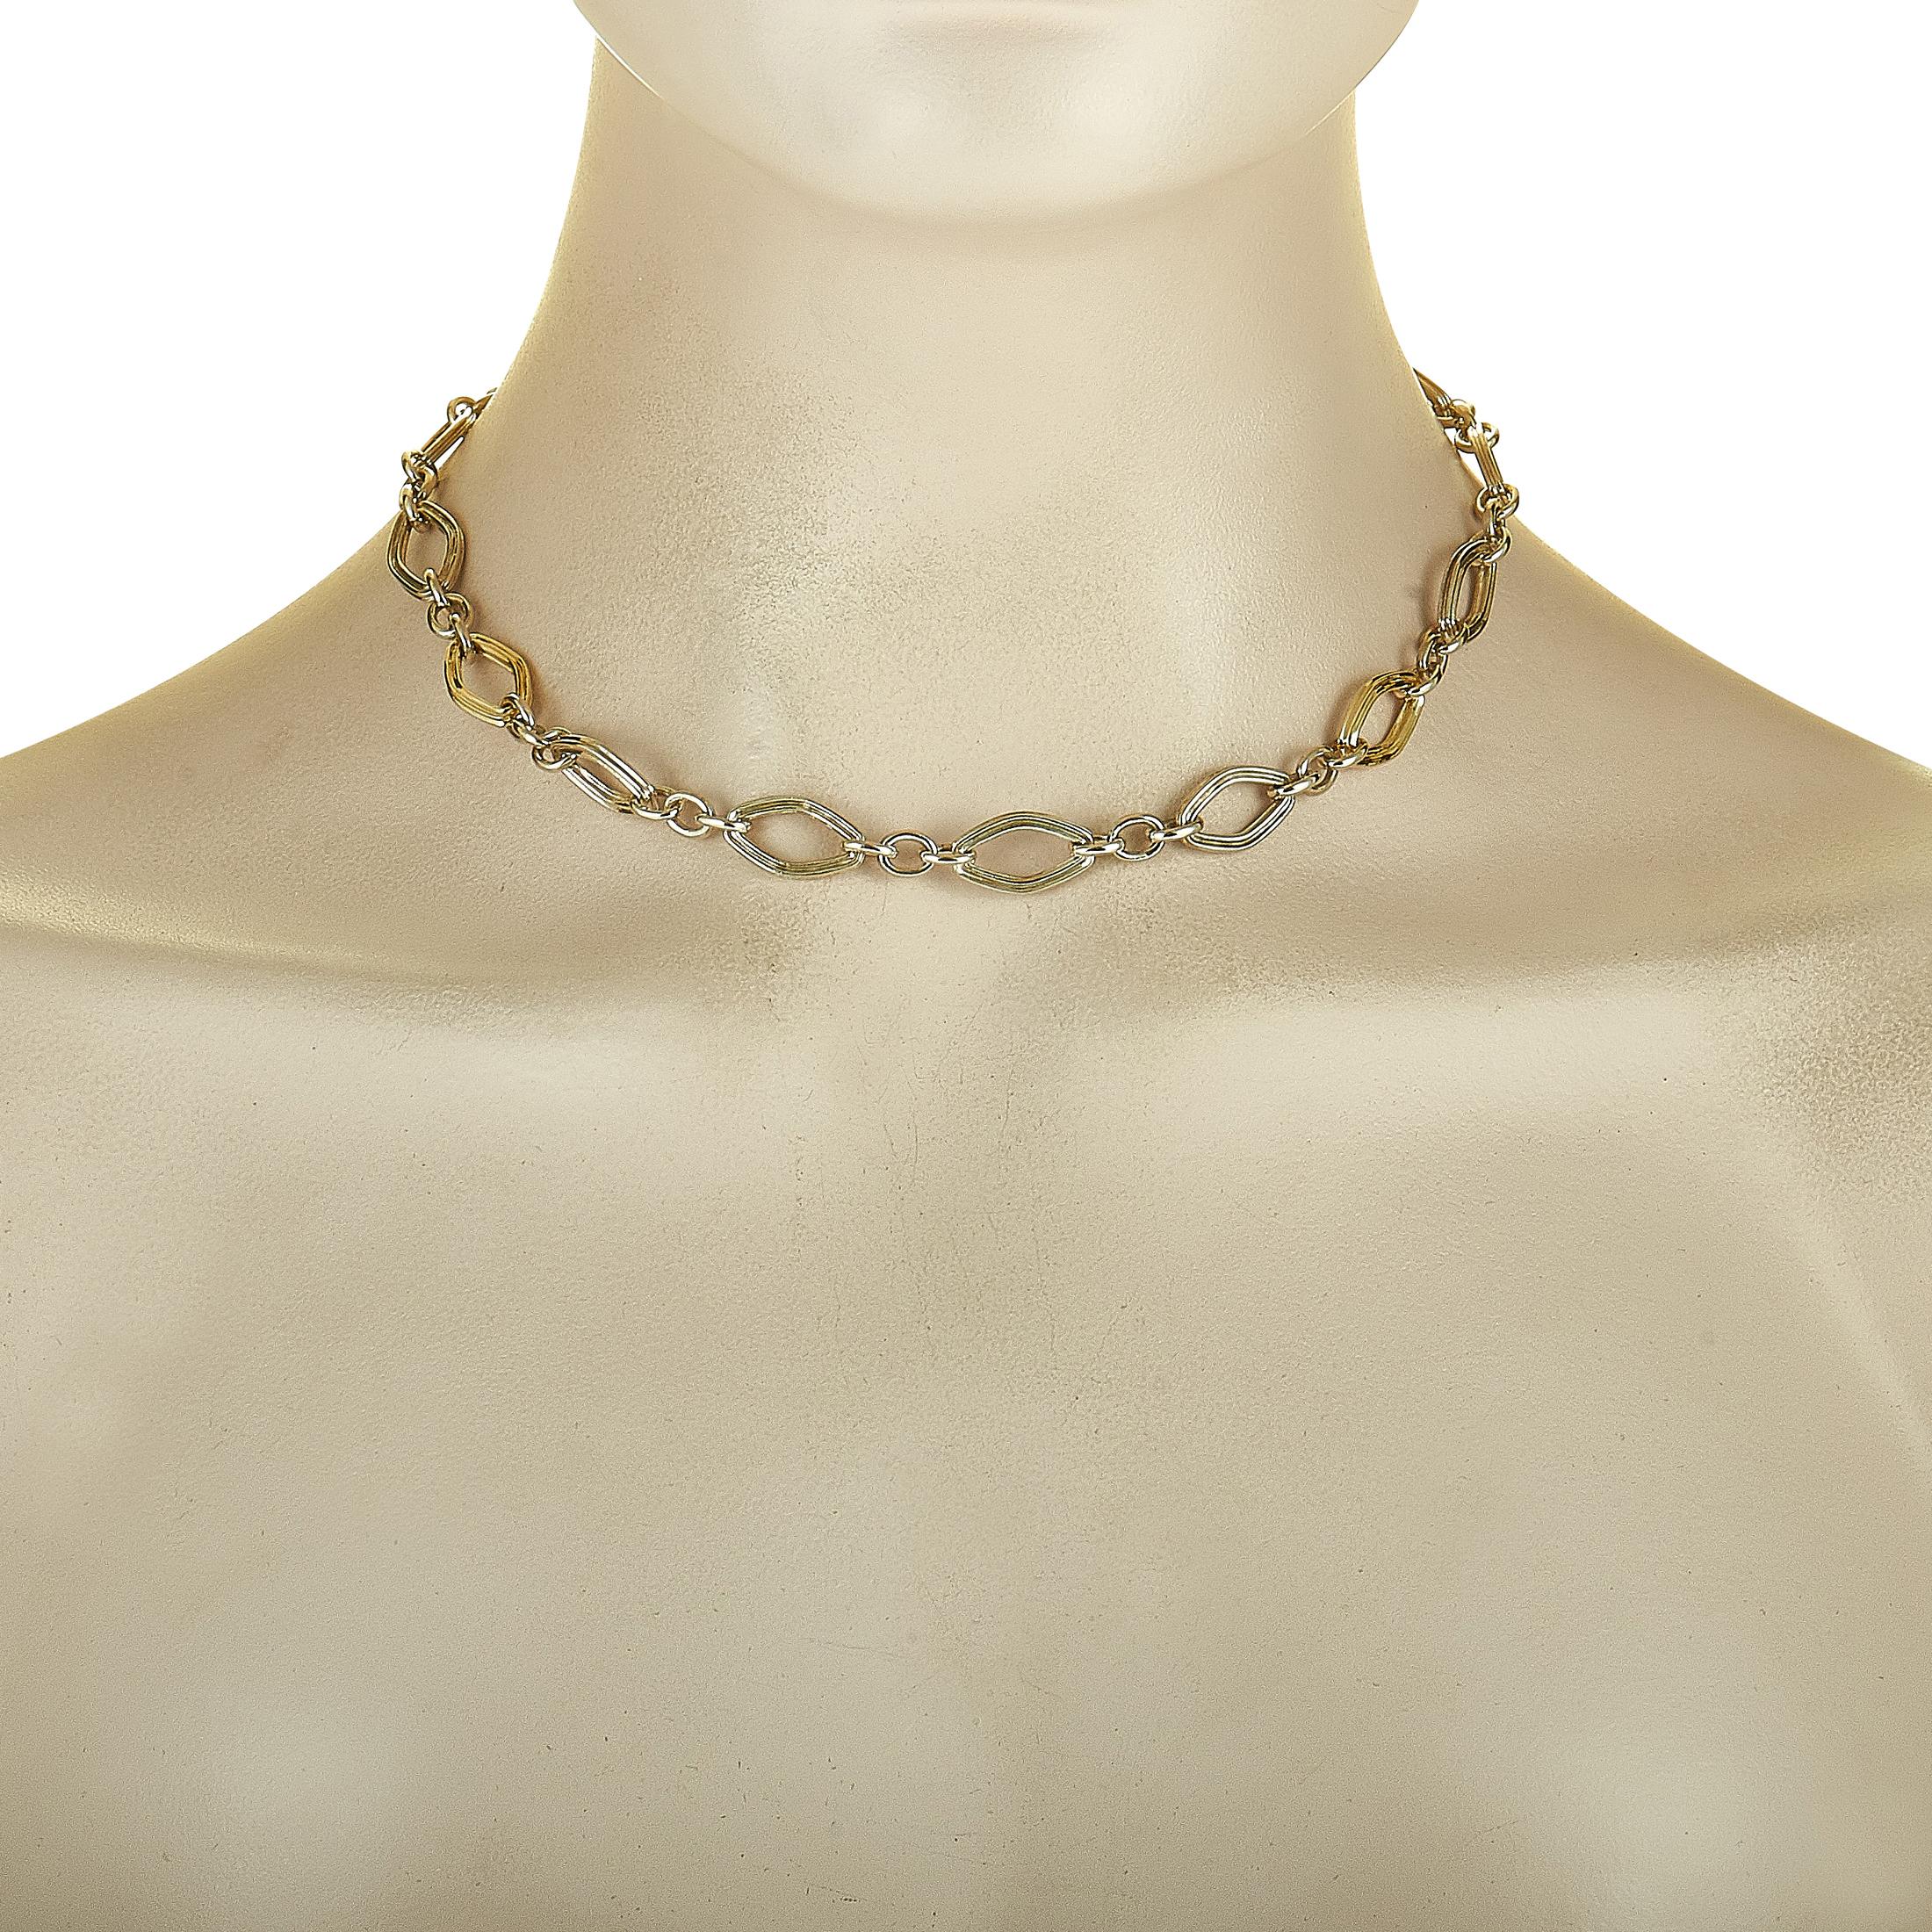 This Charles Krypell necklace is made out of 14K yellow gold and silver and weighs 33.7 grams, measuring 15” in length.

The necklace is offered in brand new condition and includes a gift box.